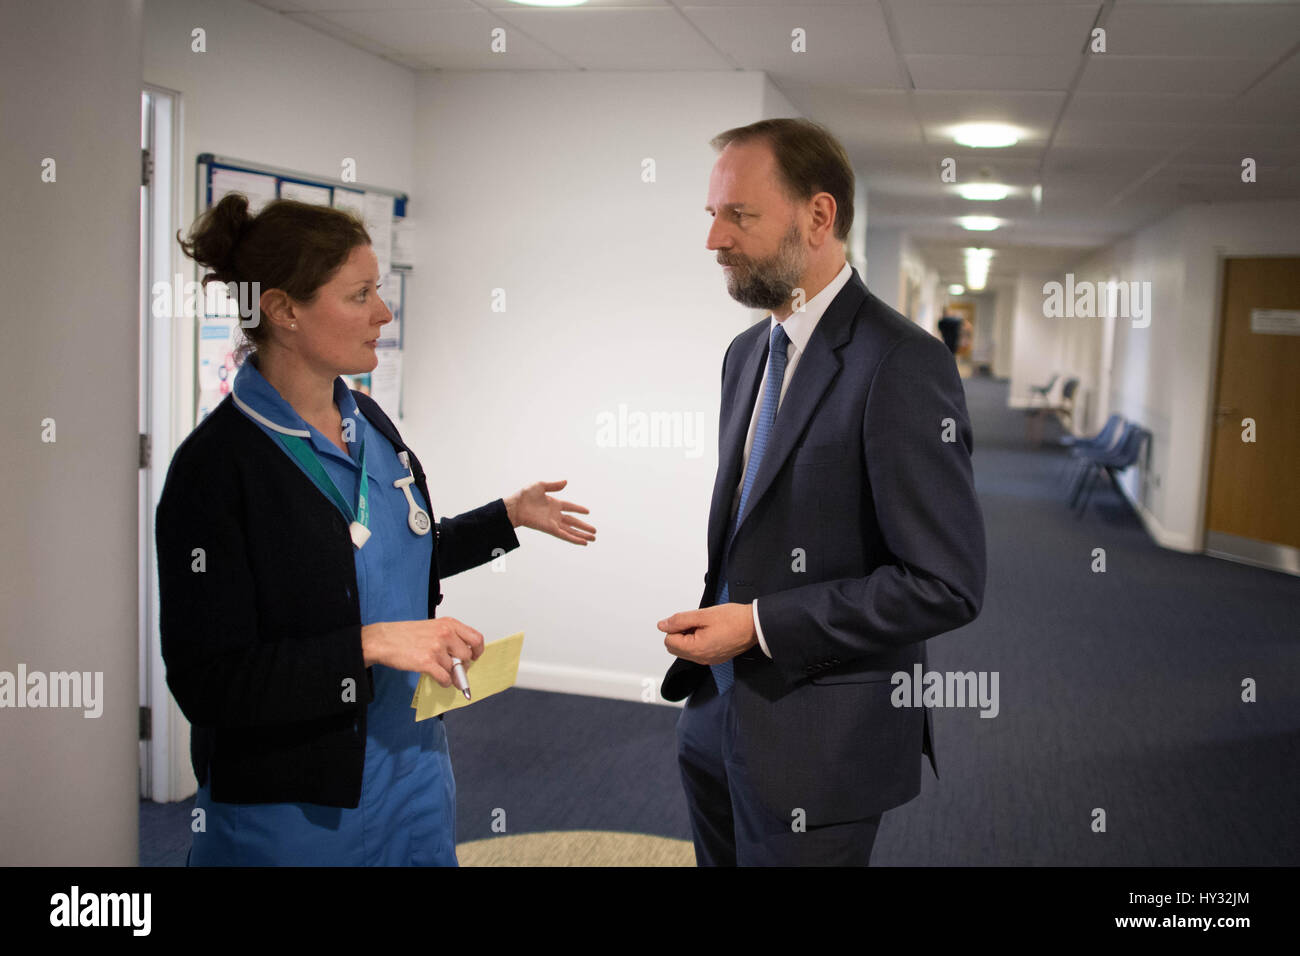 NHS England's chief executive Simon Stevens speaks to staff during the launch of the Next Steps on the NHS Five Year Forward View at Aldershot Centre for Health. Stock Photo